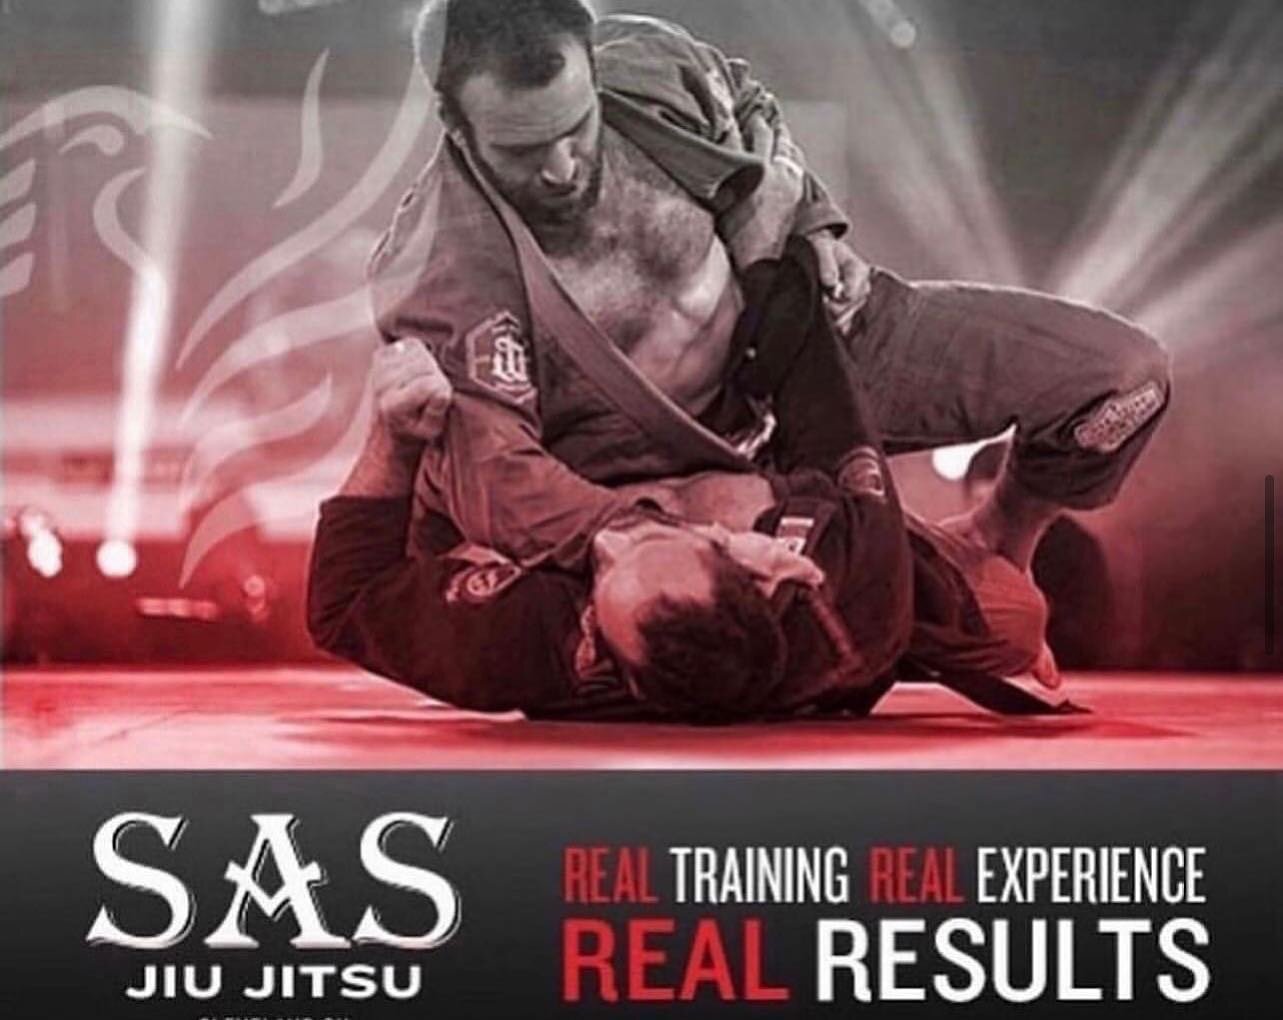 Tuesday:
Kids Class with Coach Terry and Coach MacGregor 6pm
GI Jiu Jitsu with Coach Tom Kozlowski and Coach Terry 7pm 
Come up and join us. 
Self Defense.&nbsp;&nbsp;
Grappling.&nbsp;&nbsp;
Competition.&nbsp;&nbsp;
Better your Health by increasing y